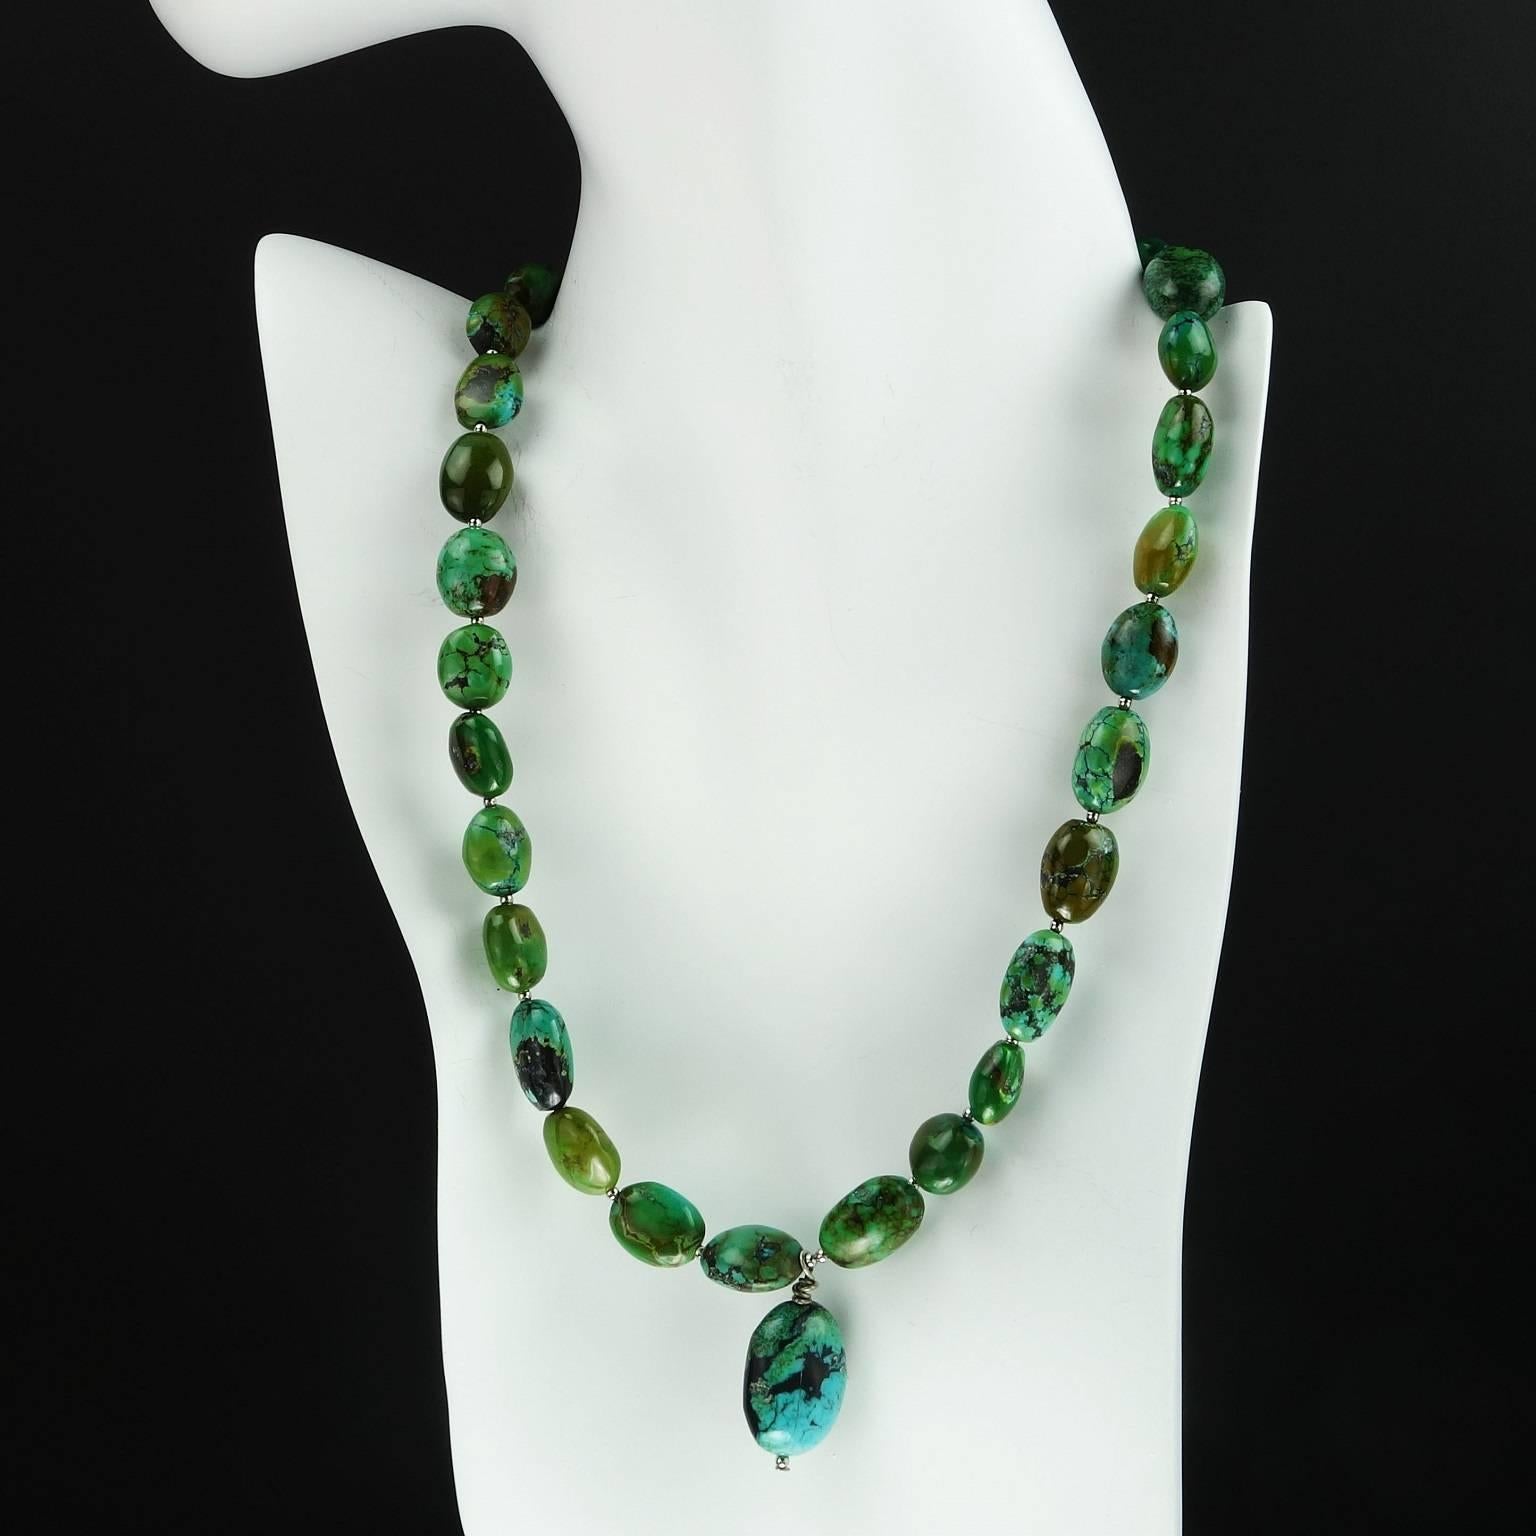 Wonderful necklace of graduated green Turquoise oval beads with Turquoise focal. The oval Turquoise beads range in size from 16x9mm to 11x10mm. The focal is 21x14mm. The closure is a silvertone lobster claw clasp. The overall necklace length is